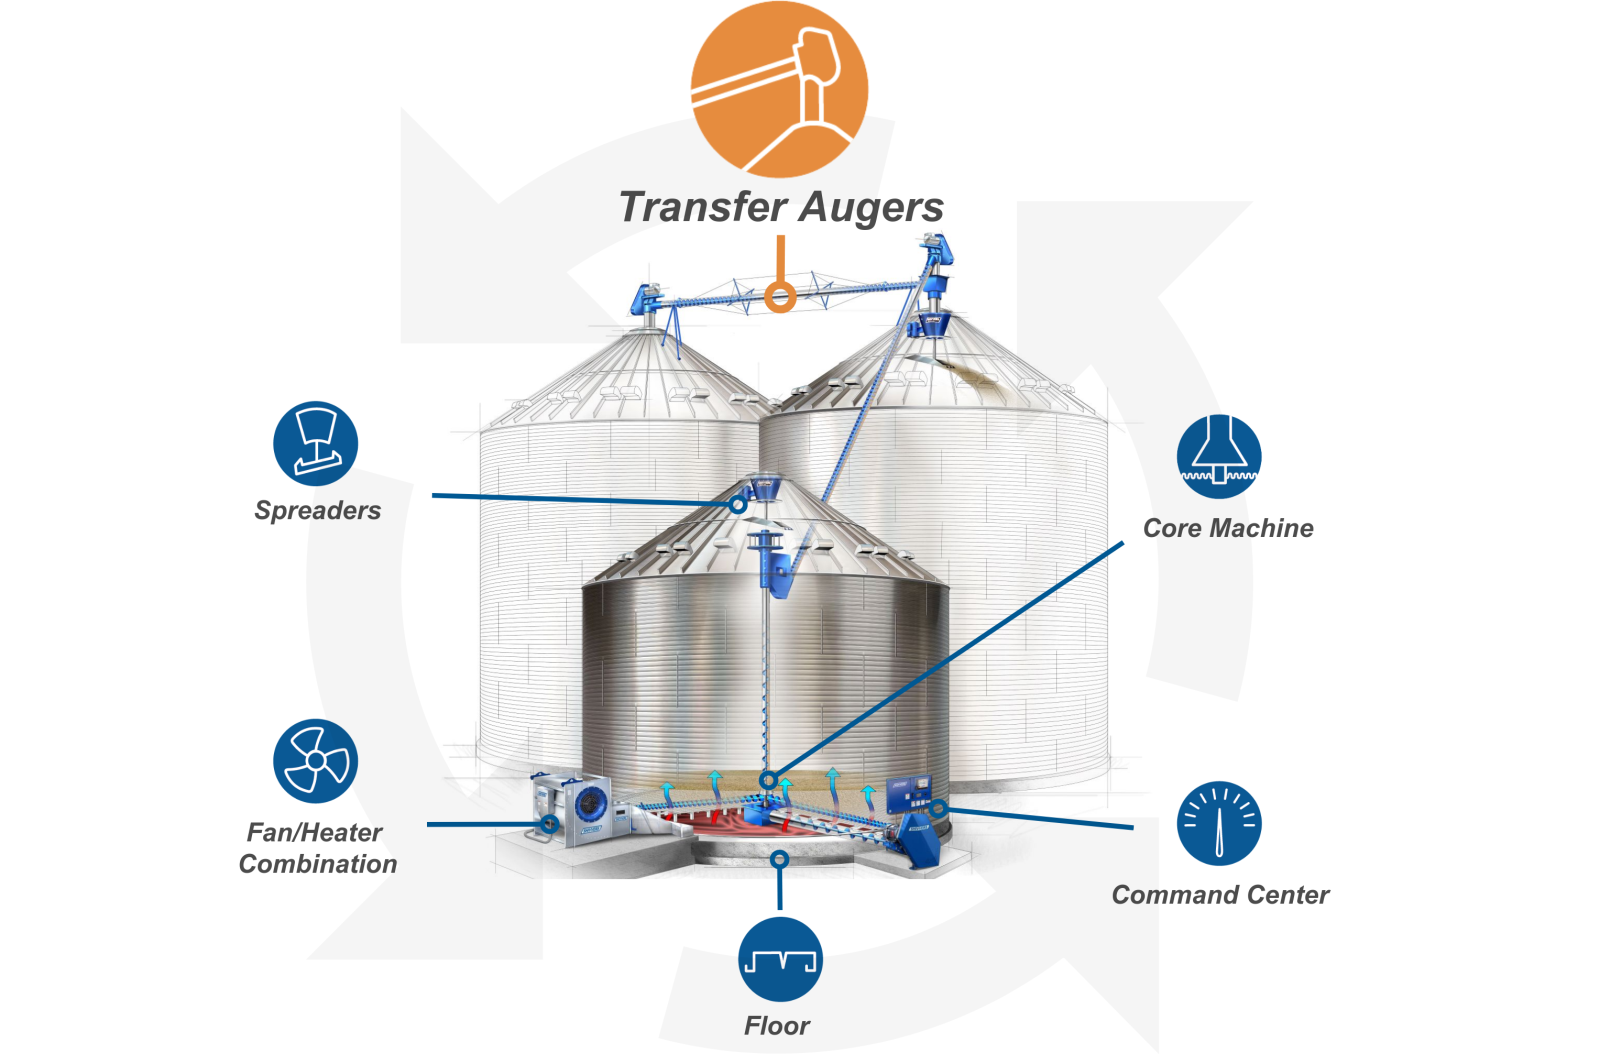 Transfer Augers Component Roadmap Graphic